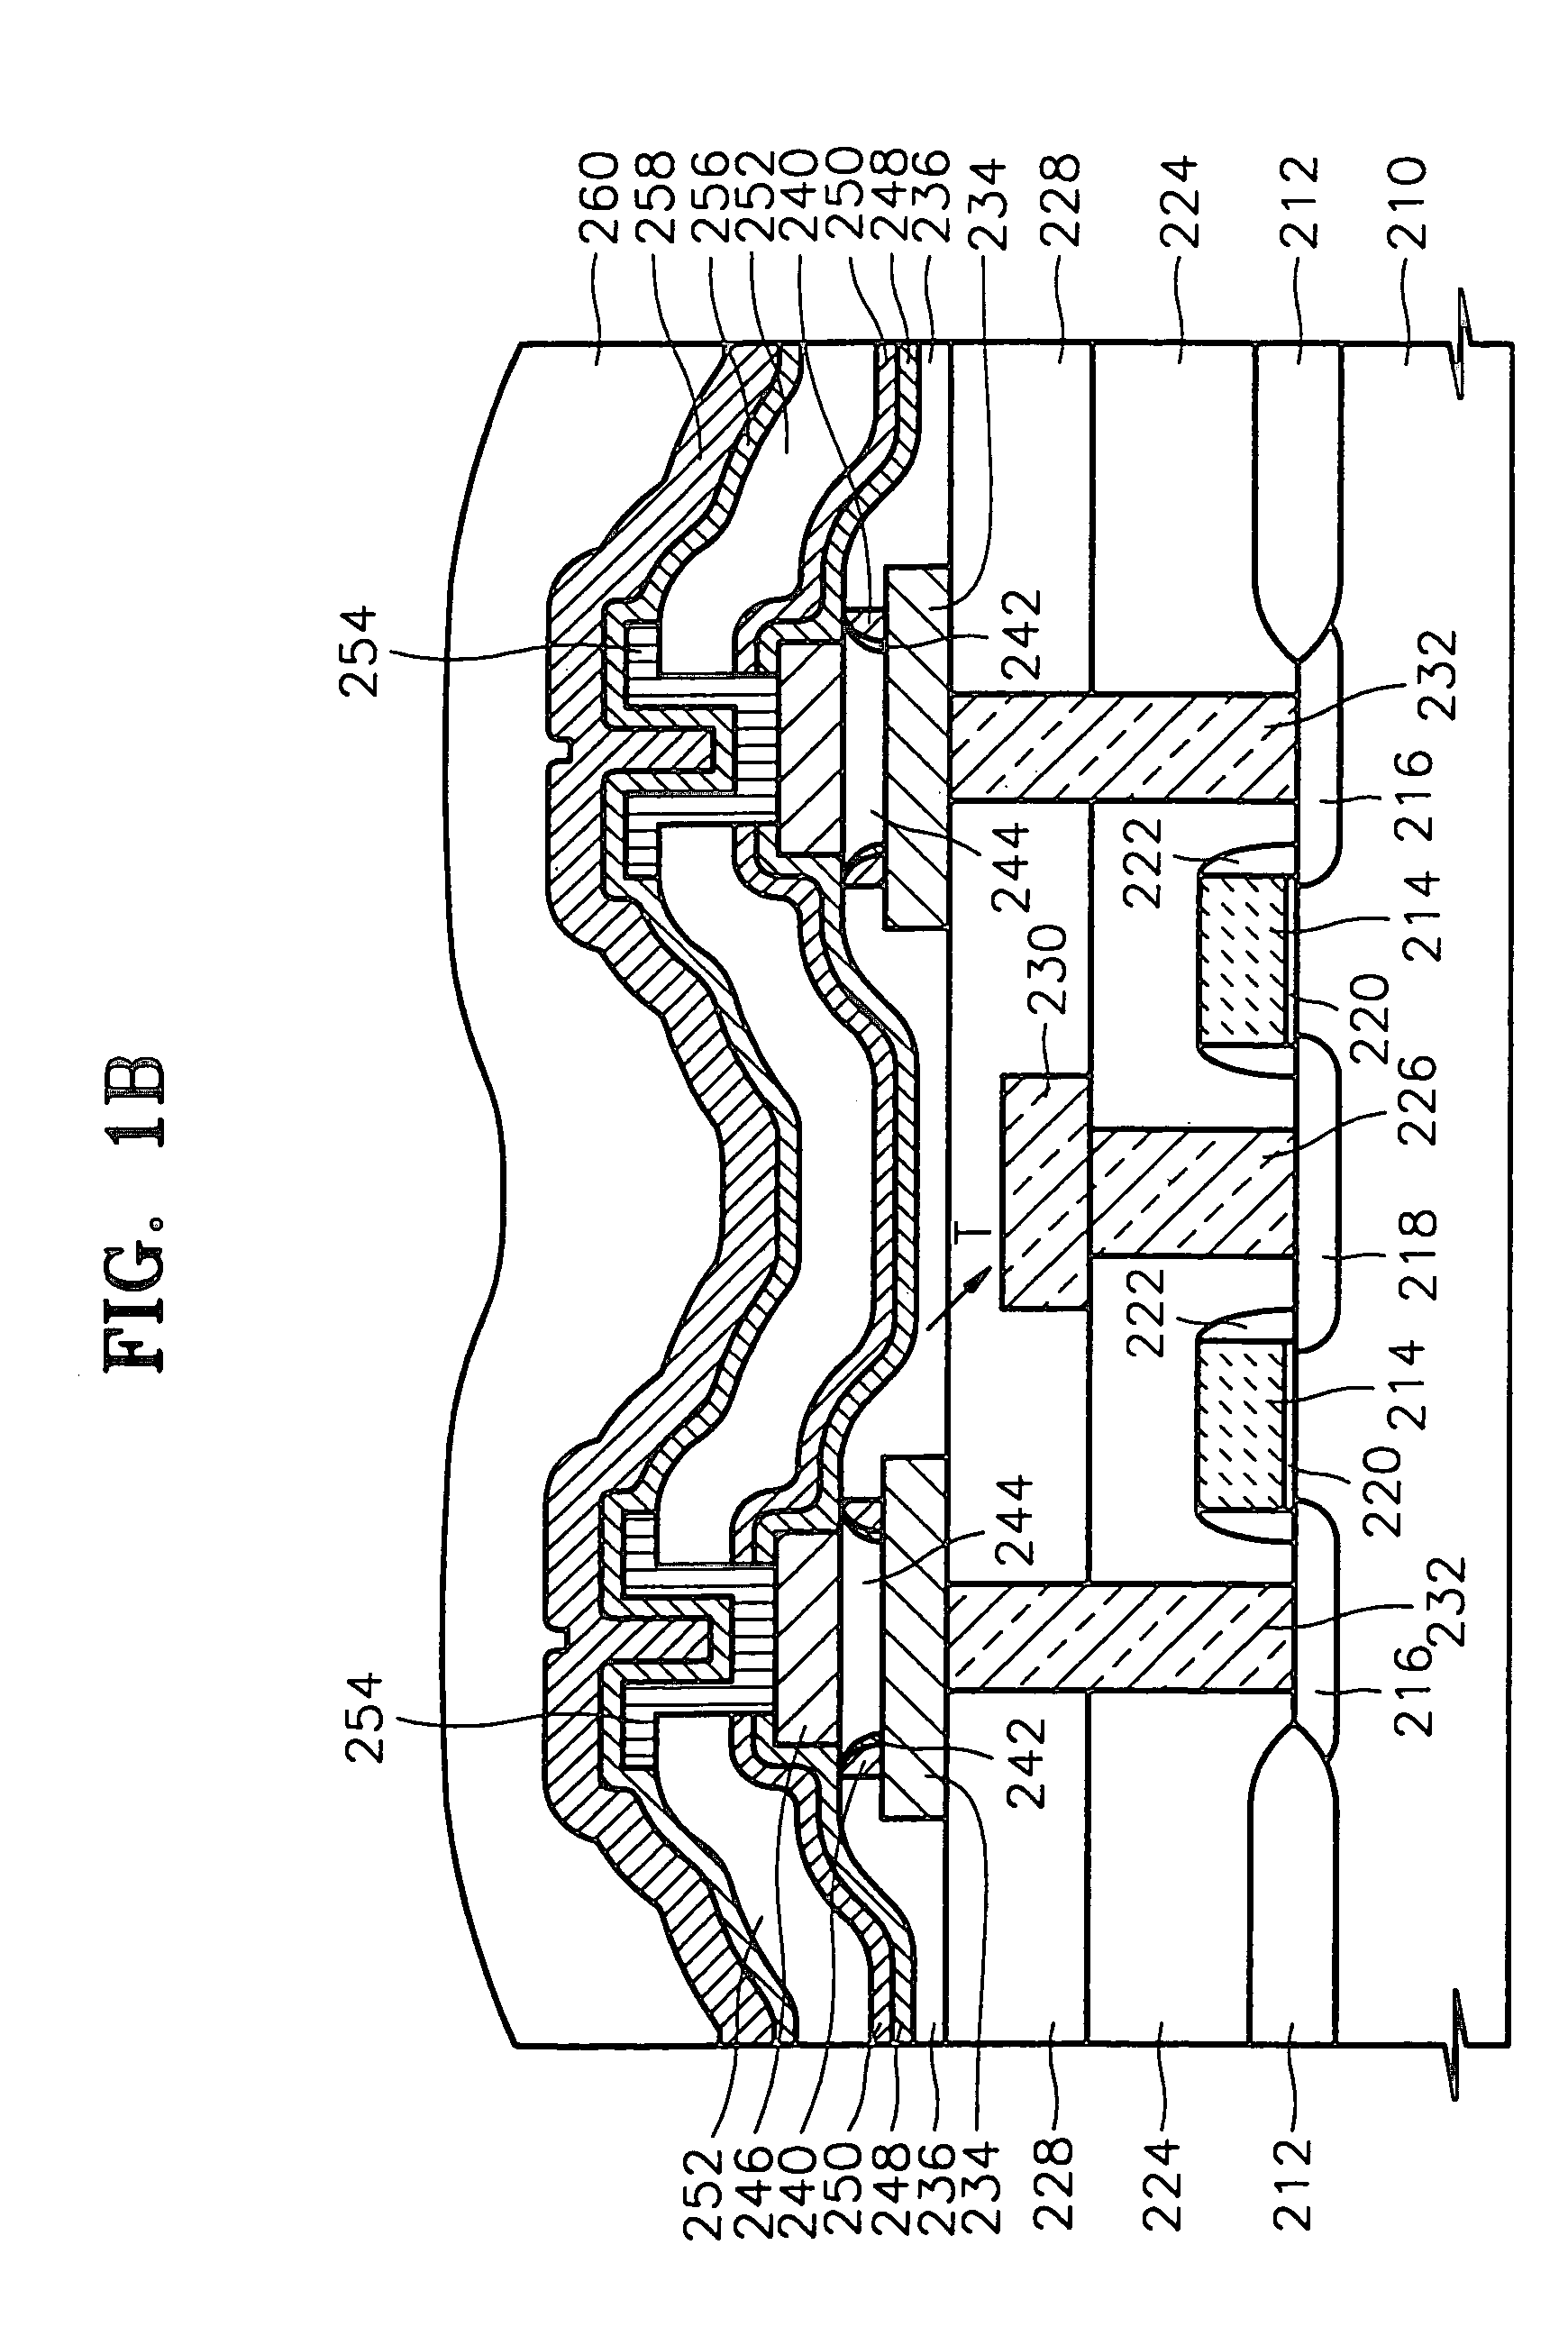 Integrated circuit devices having dielectric regions protected with multi-layer insulation structures